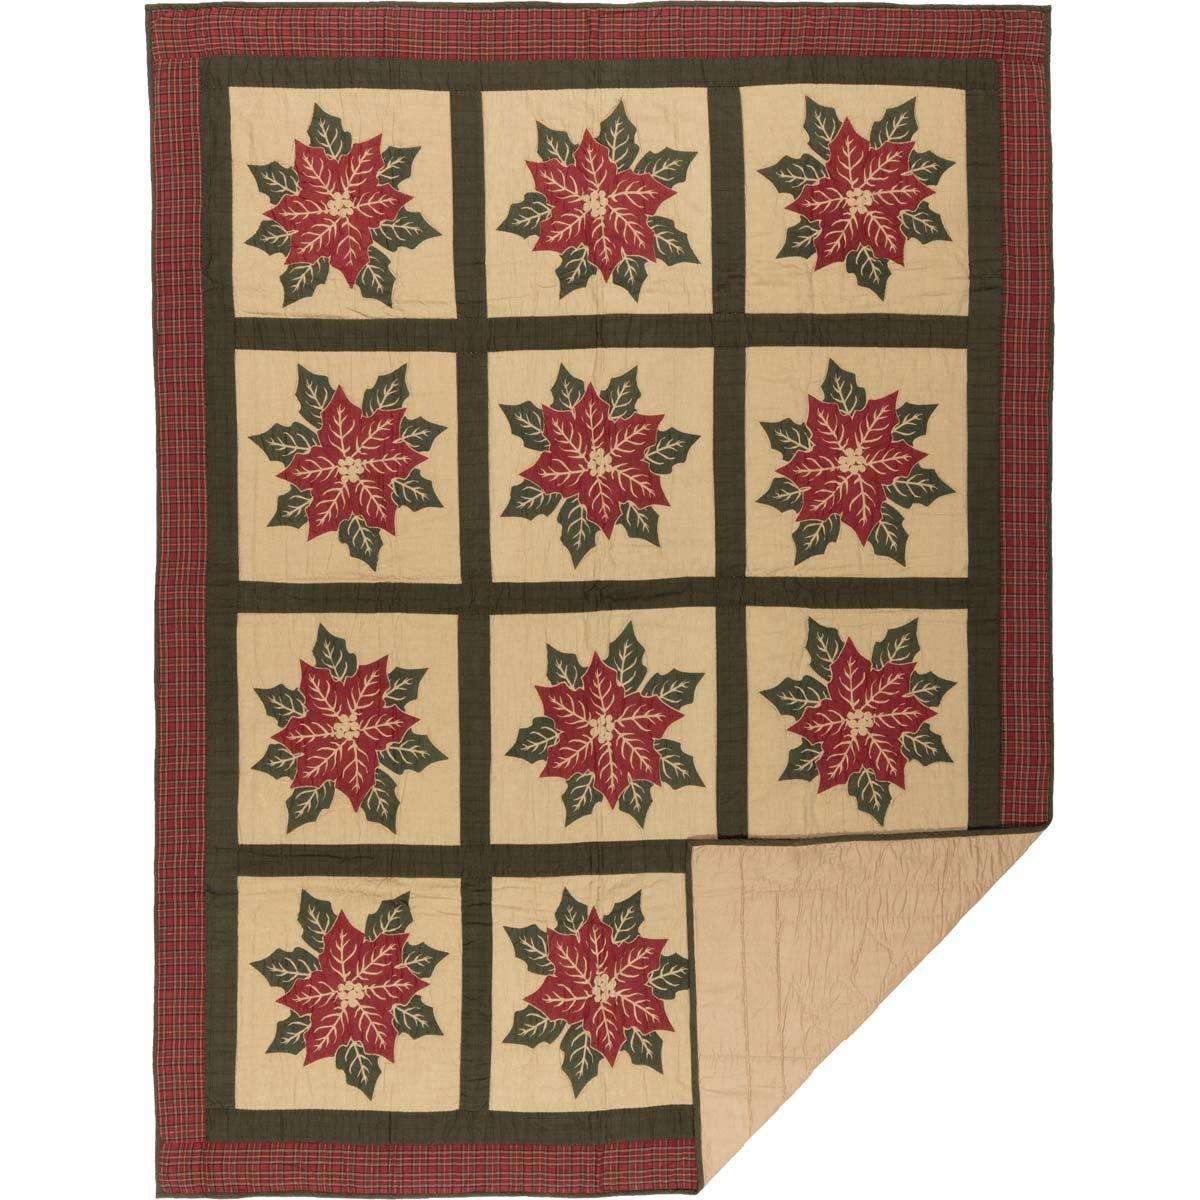 National Quilt Museum Poinsettia Block Twin Quilt 68Wx86L VHC Brands full